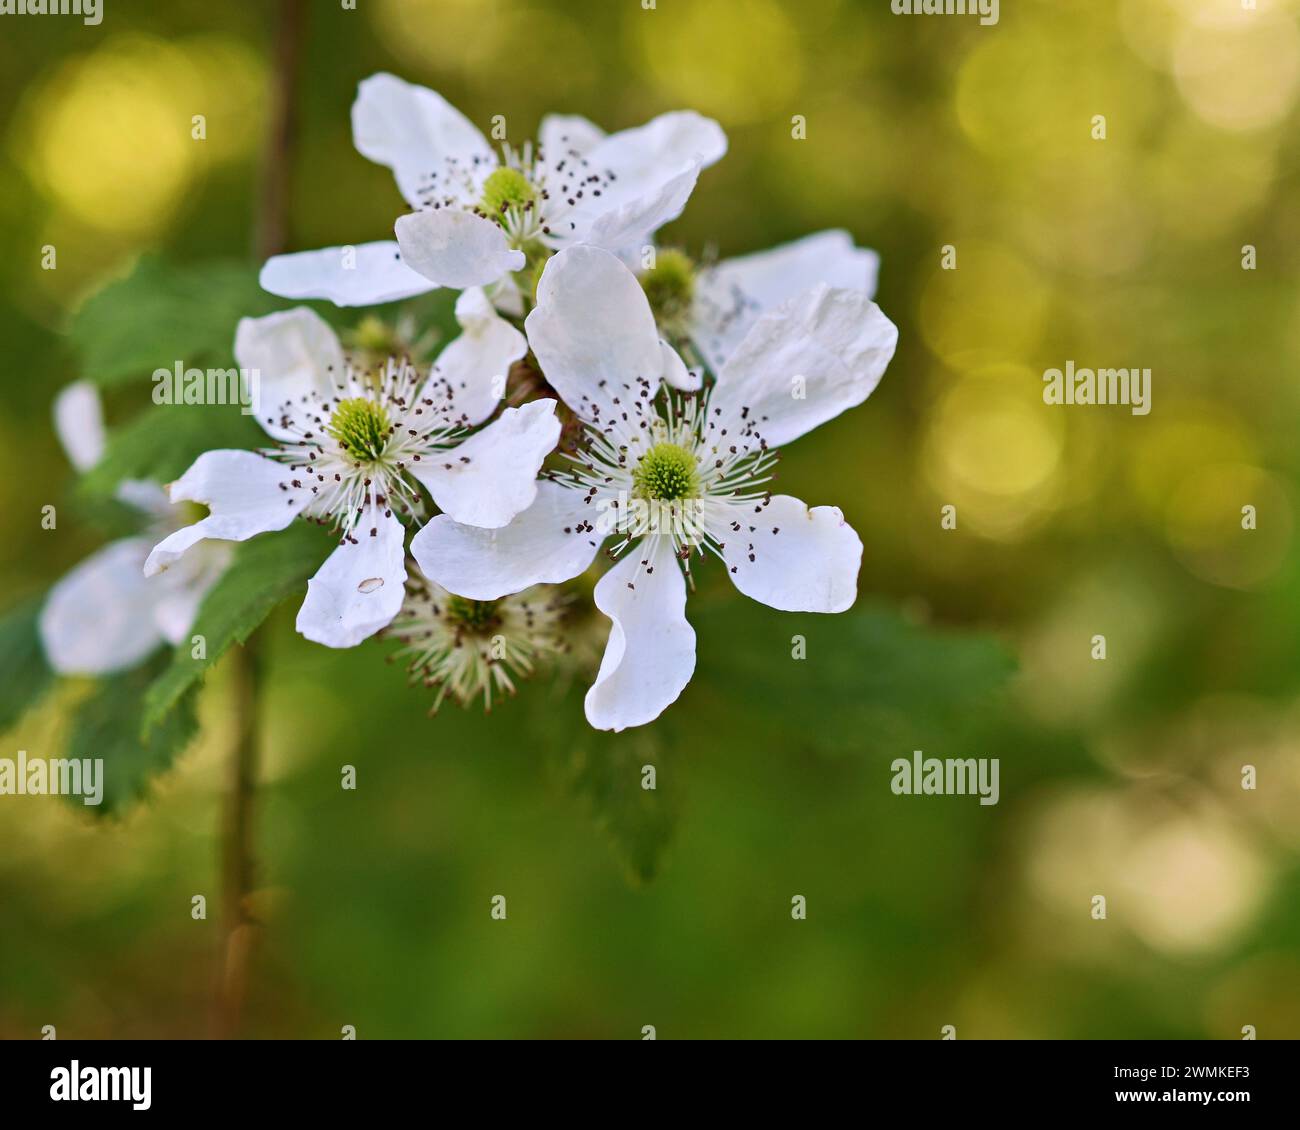 White berry blossoms on a plant with a bokeh green background Stock Photo